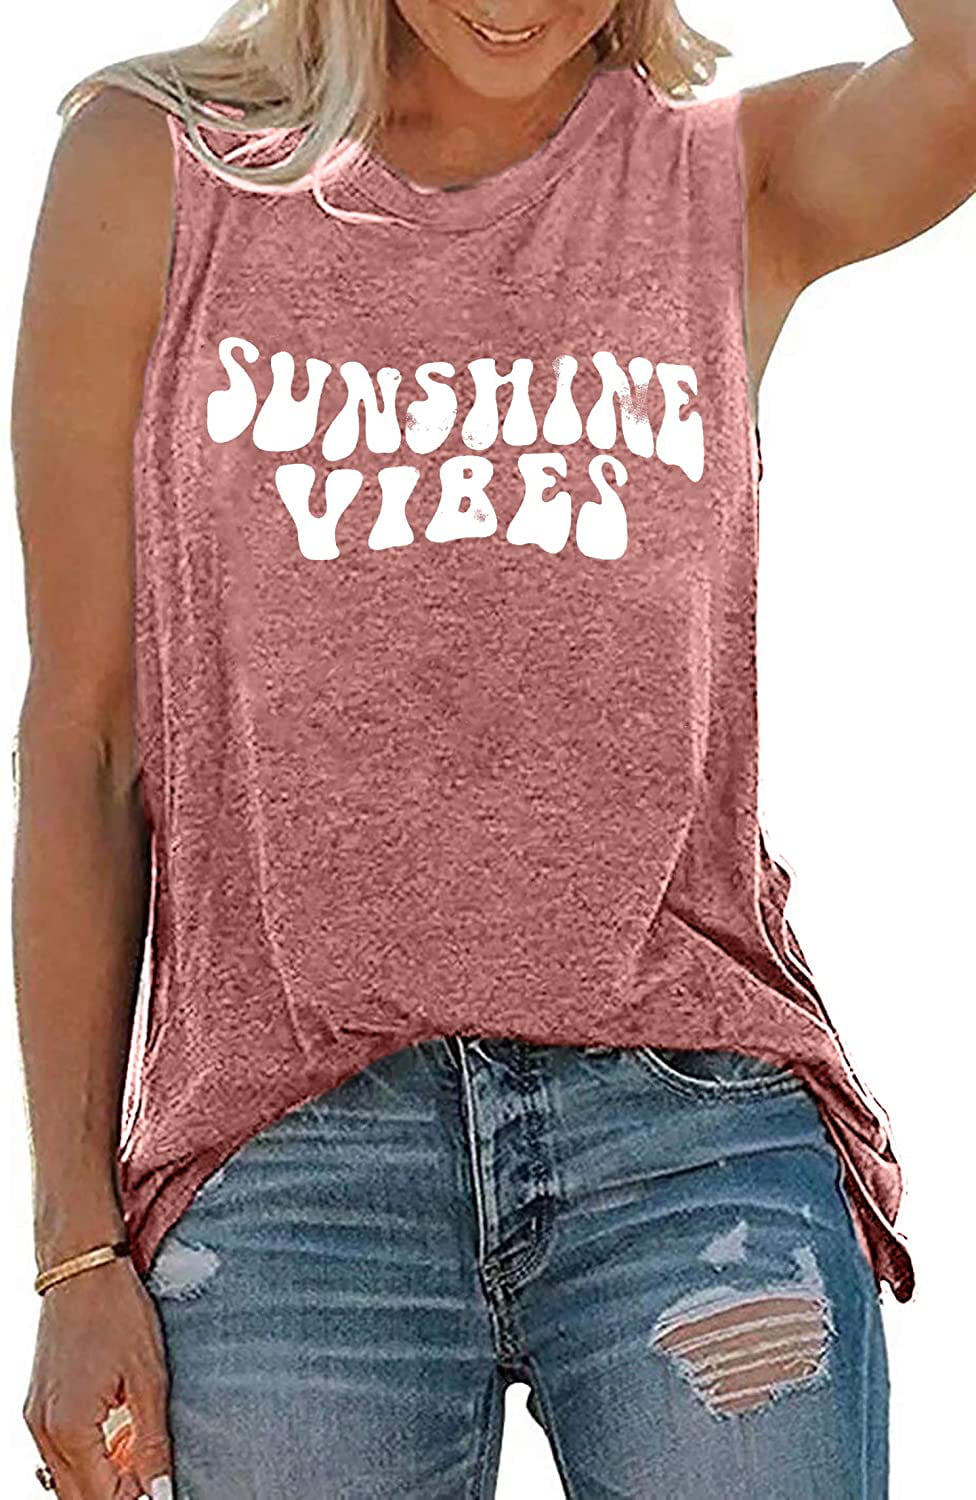 Tank O-neck Sleeveless Vibes Cami Top Blouse Tee Camisole Vest T-shirt Women